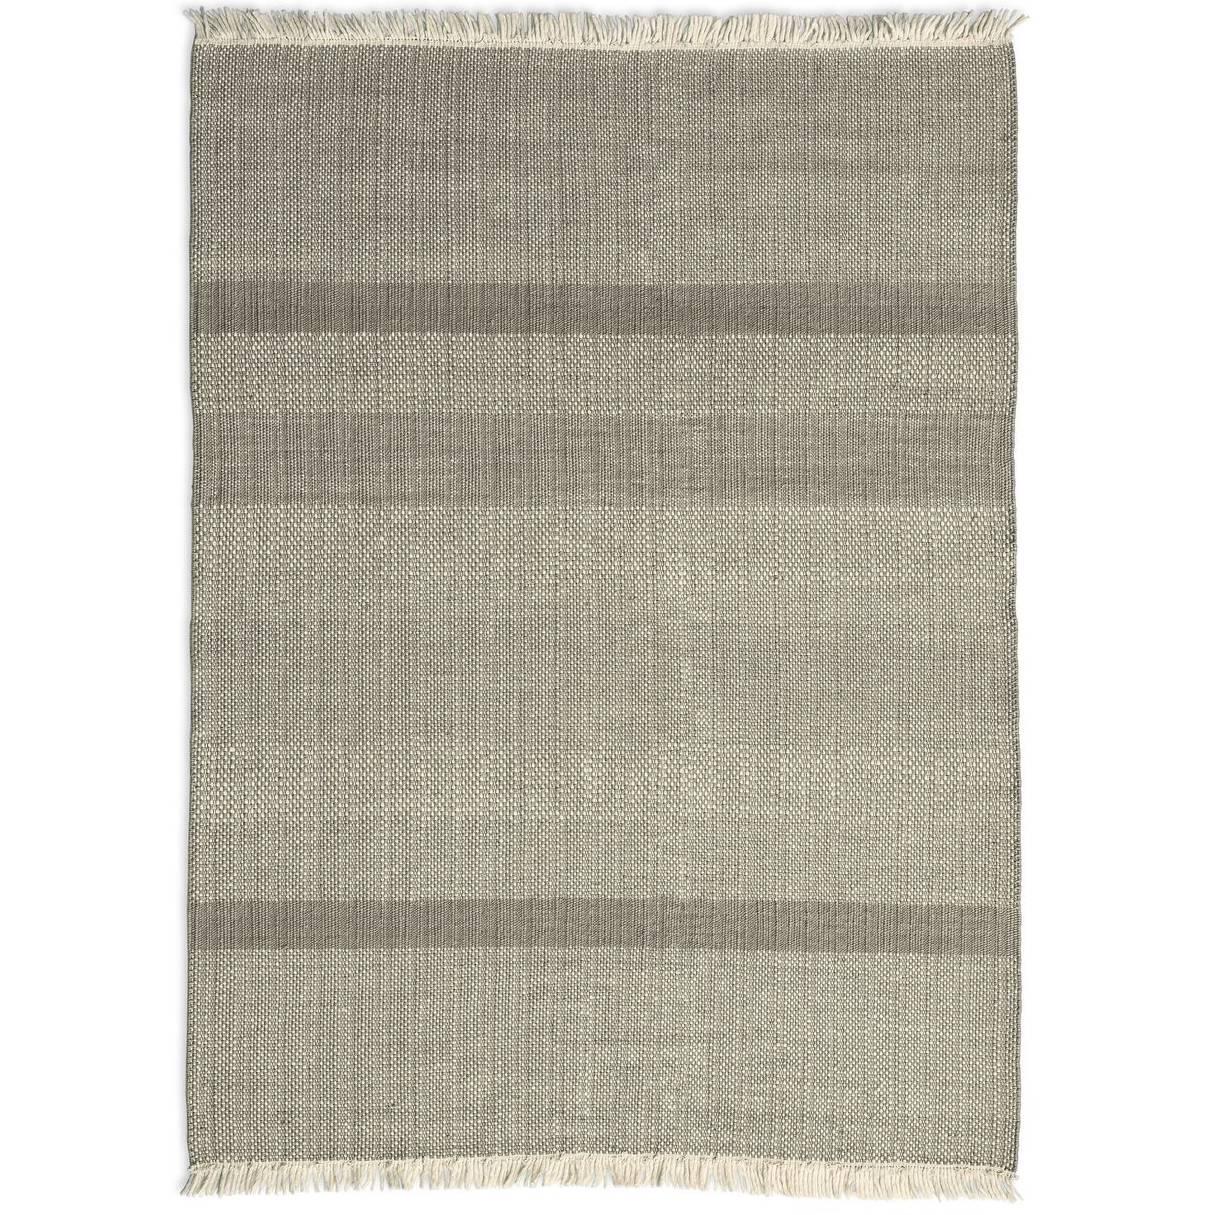 Tres Pearl Hand-Loomed Wool and Felt Texture Rug by Nani Marquina